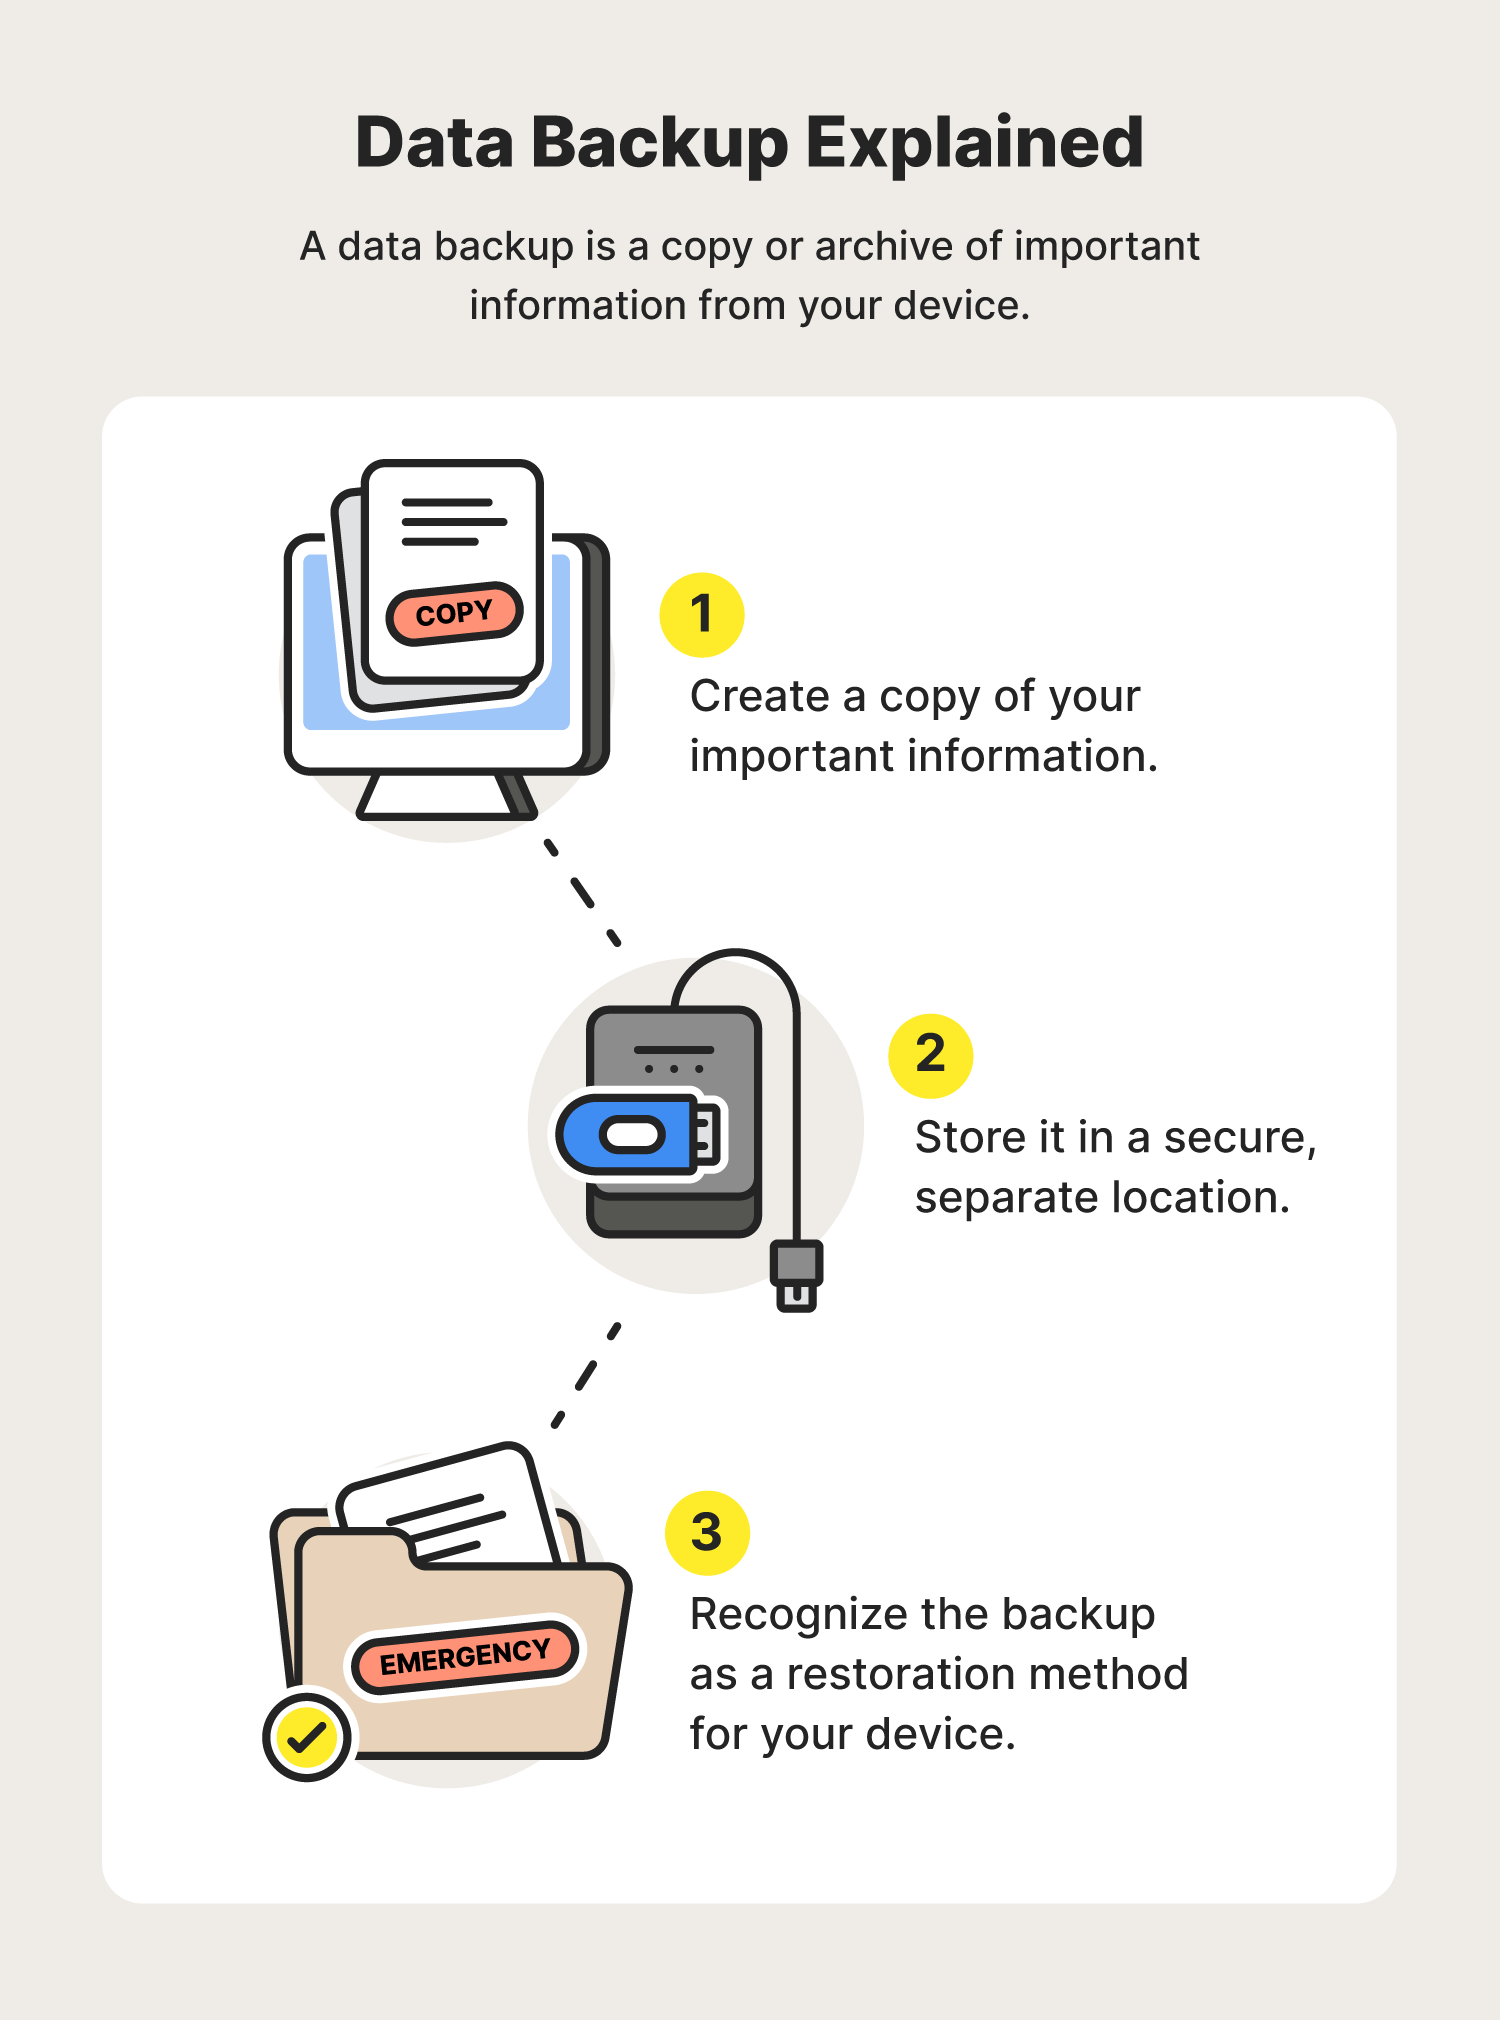 How Does Data Backup And Recovery Protect Your Important Files And Data? How does Data Backup work?